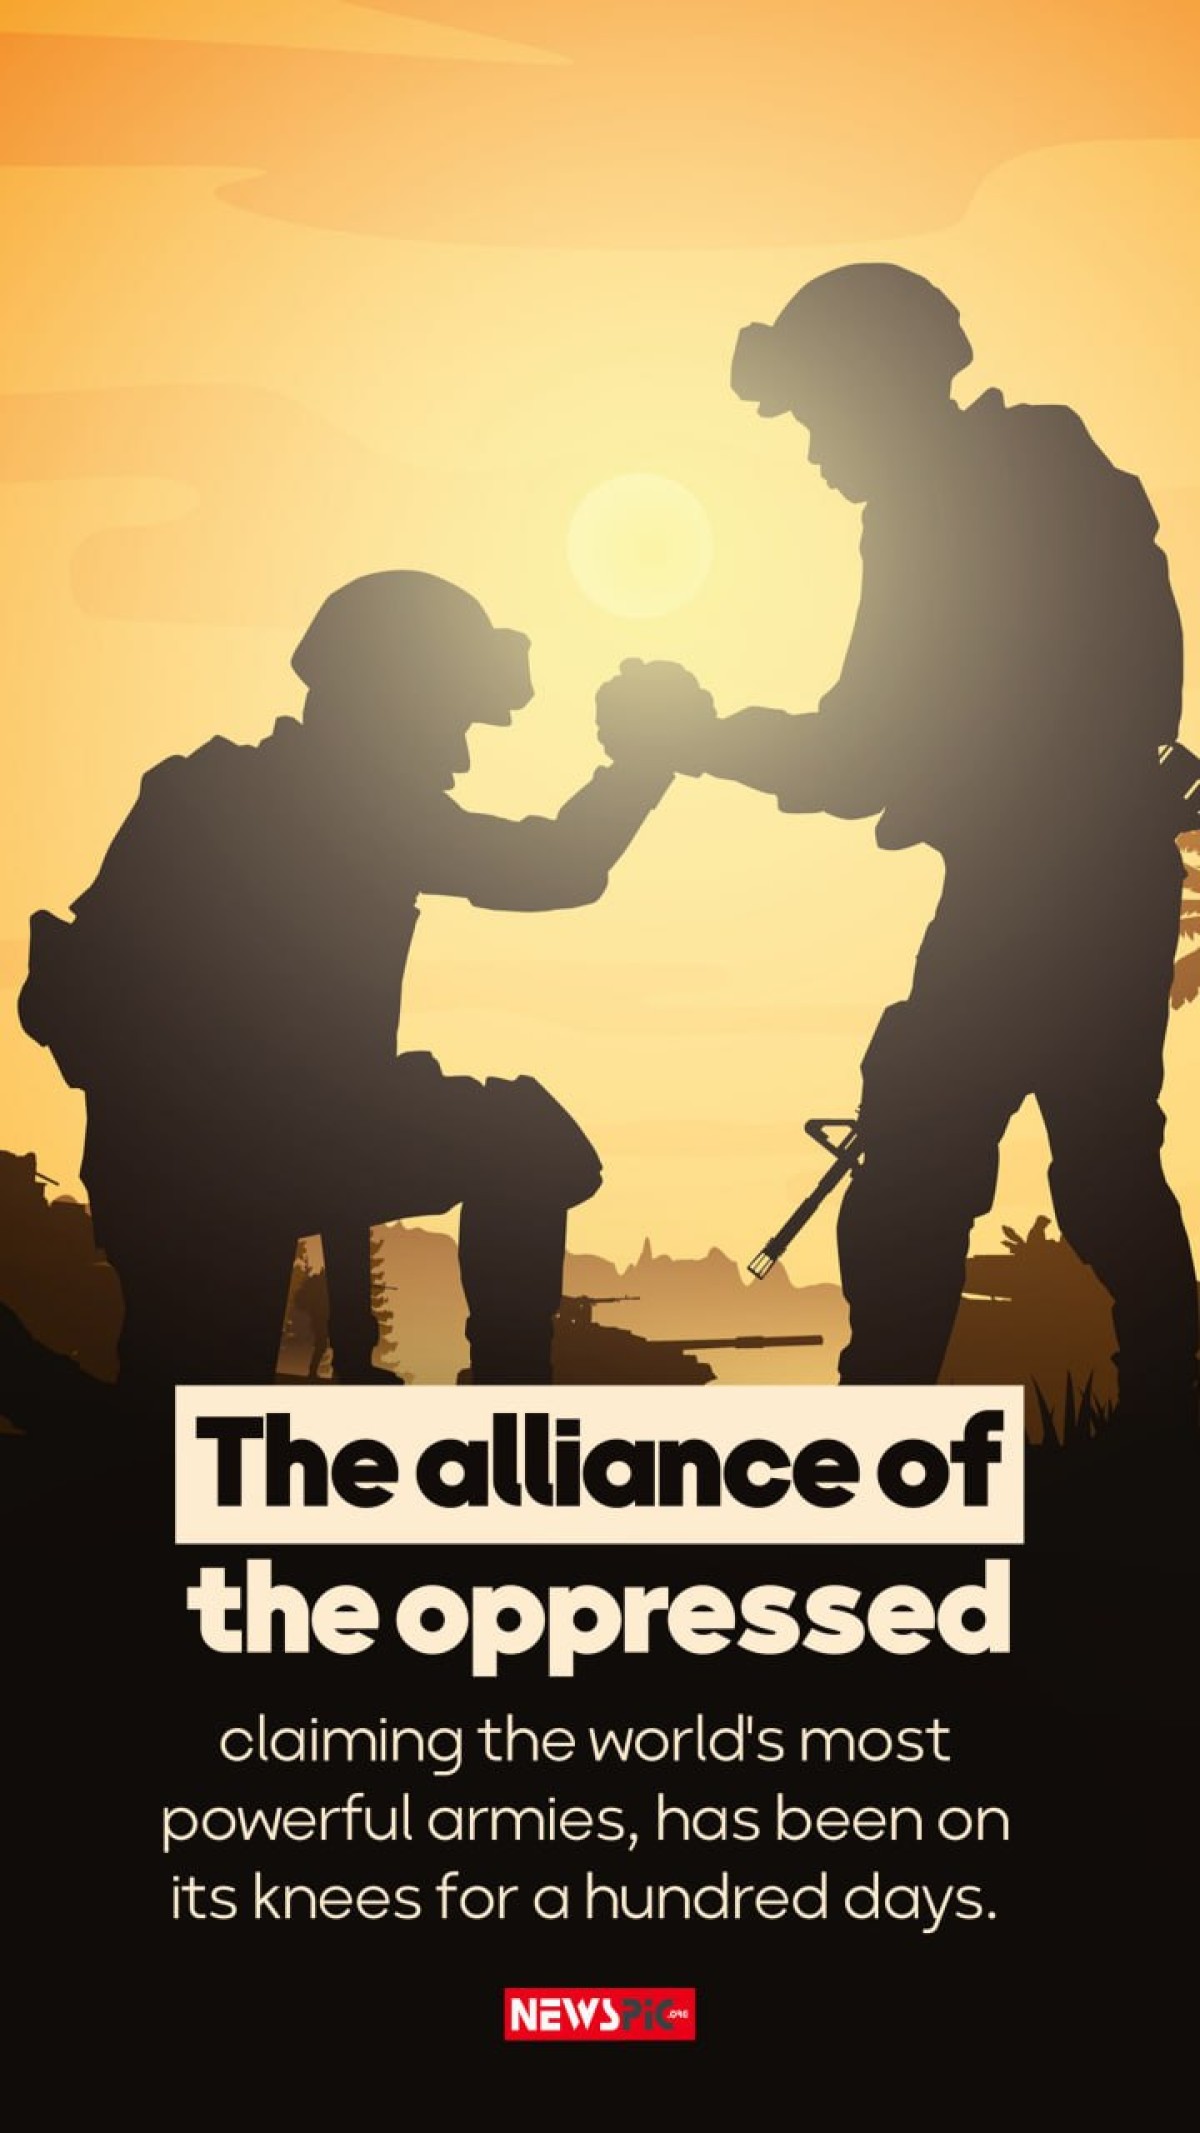 The alliance of the oppressed claiming the world's most powerful armies, has been on its knees for a hundred days.